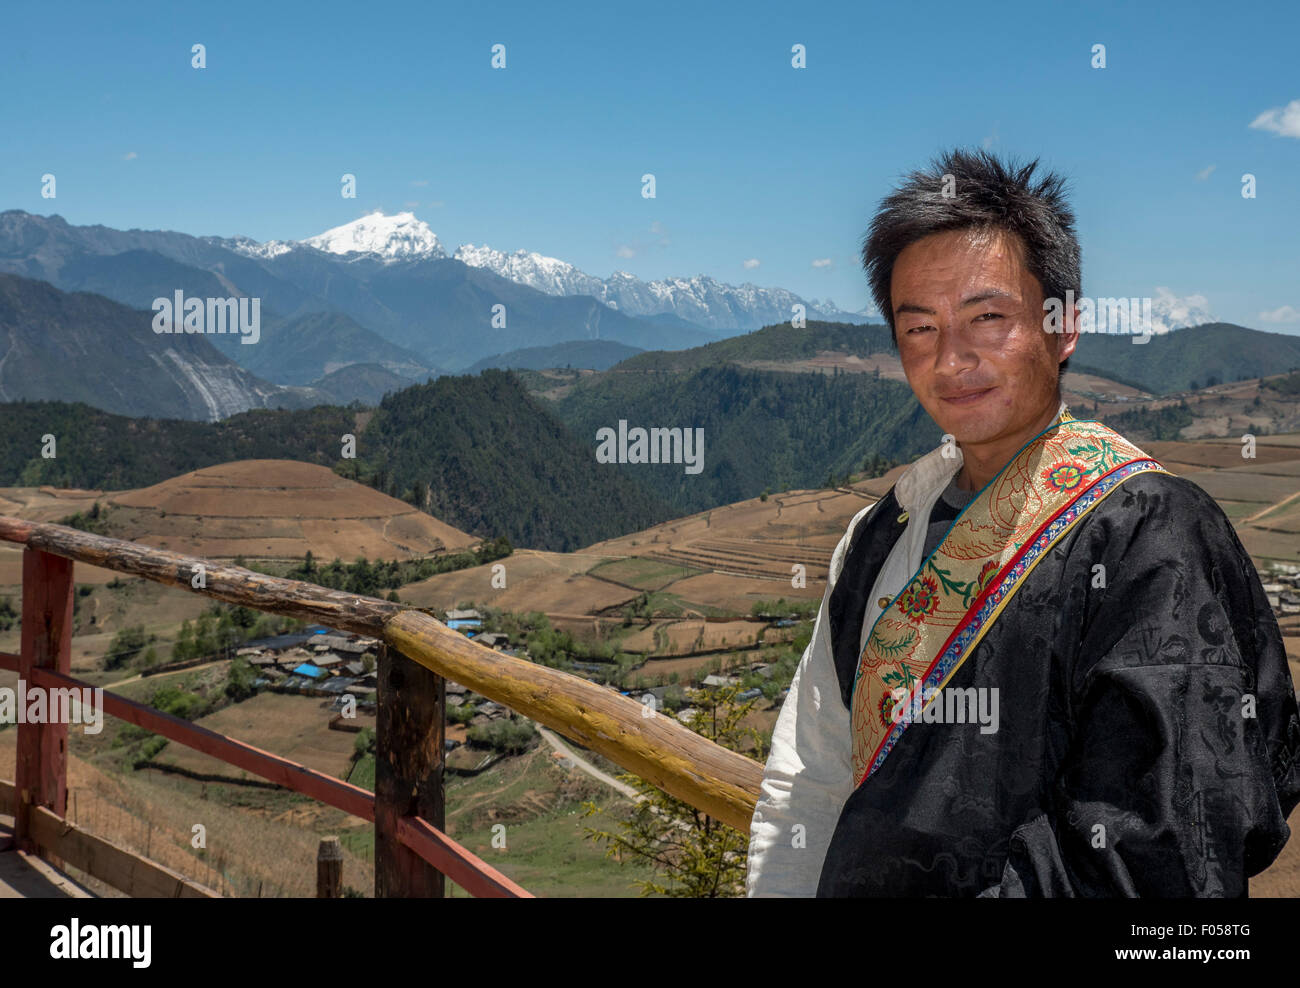 A Tibetan Man Dressed In Traditional Costume Poses In Front Of Meili Snow Mountain In Yunnan Province China Stock Photo